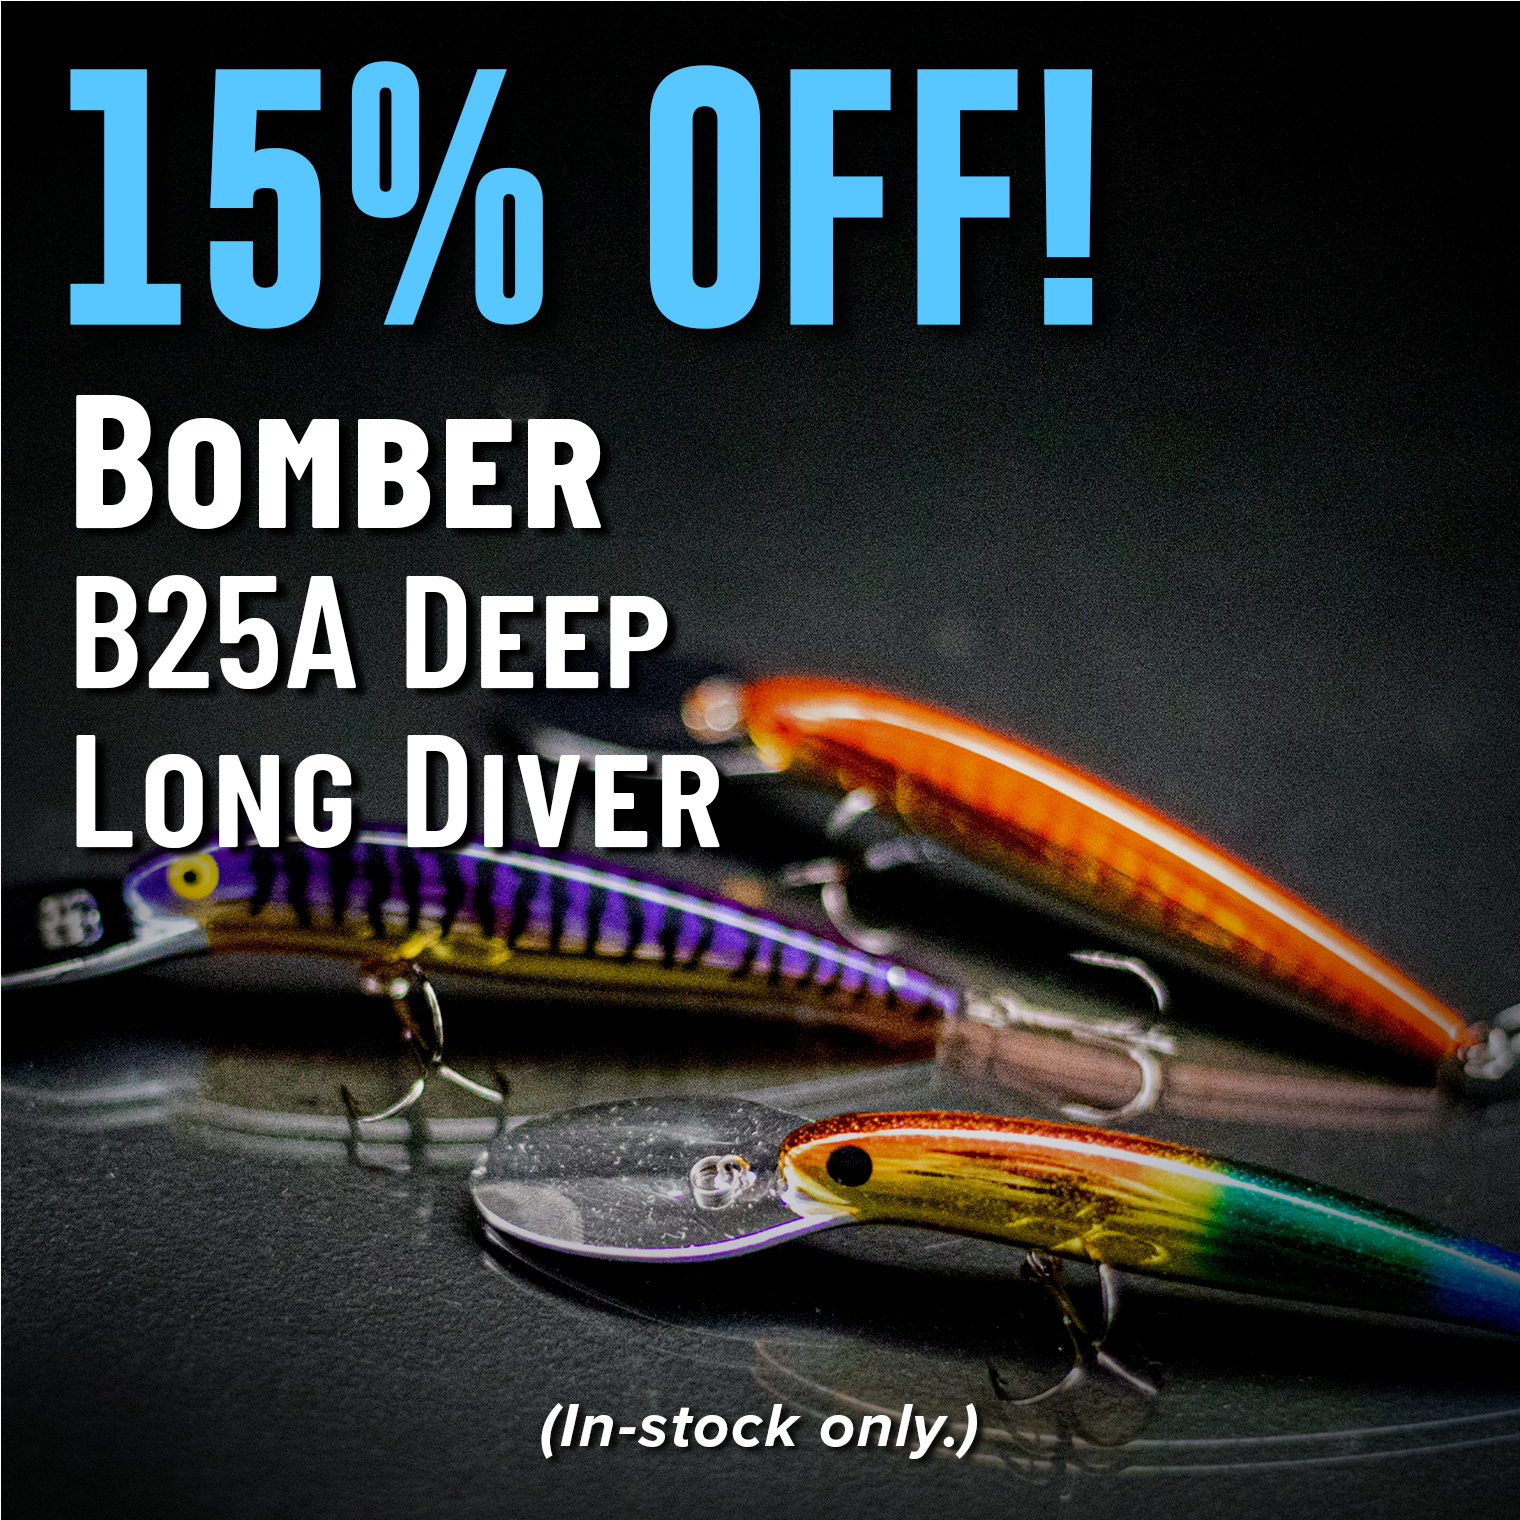 15% Off! Bomber B25A Deep Long Diver (In-stock only.)